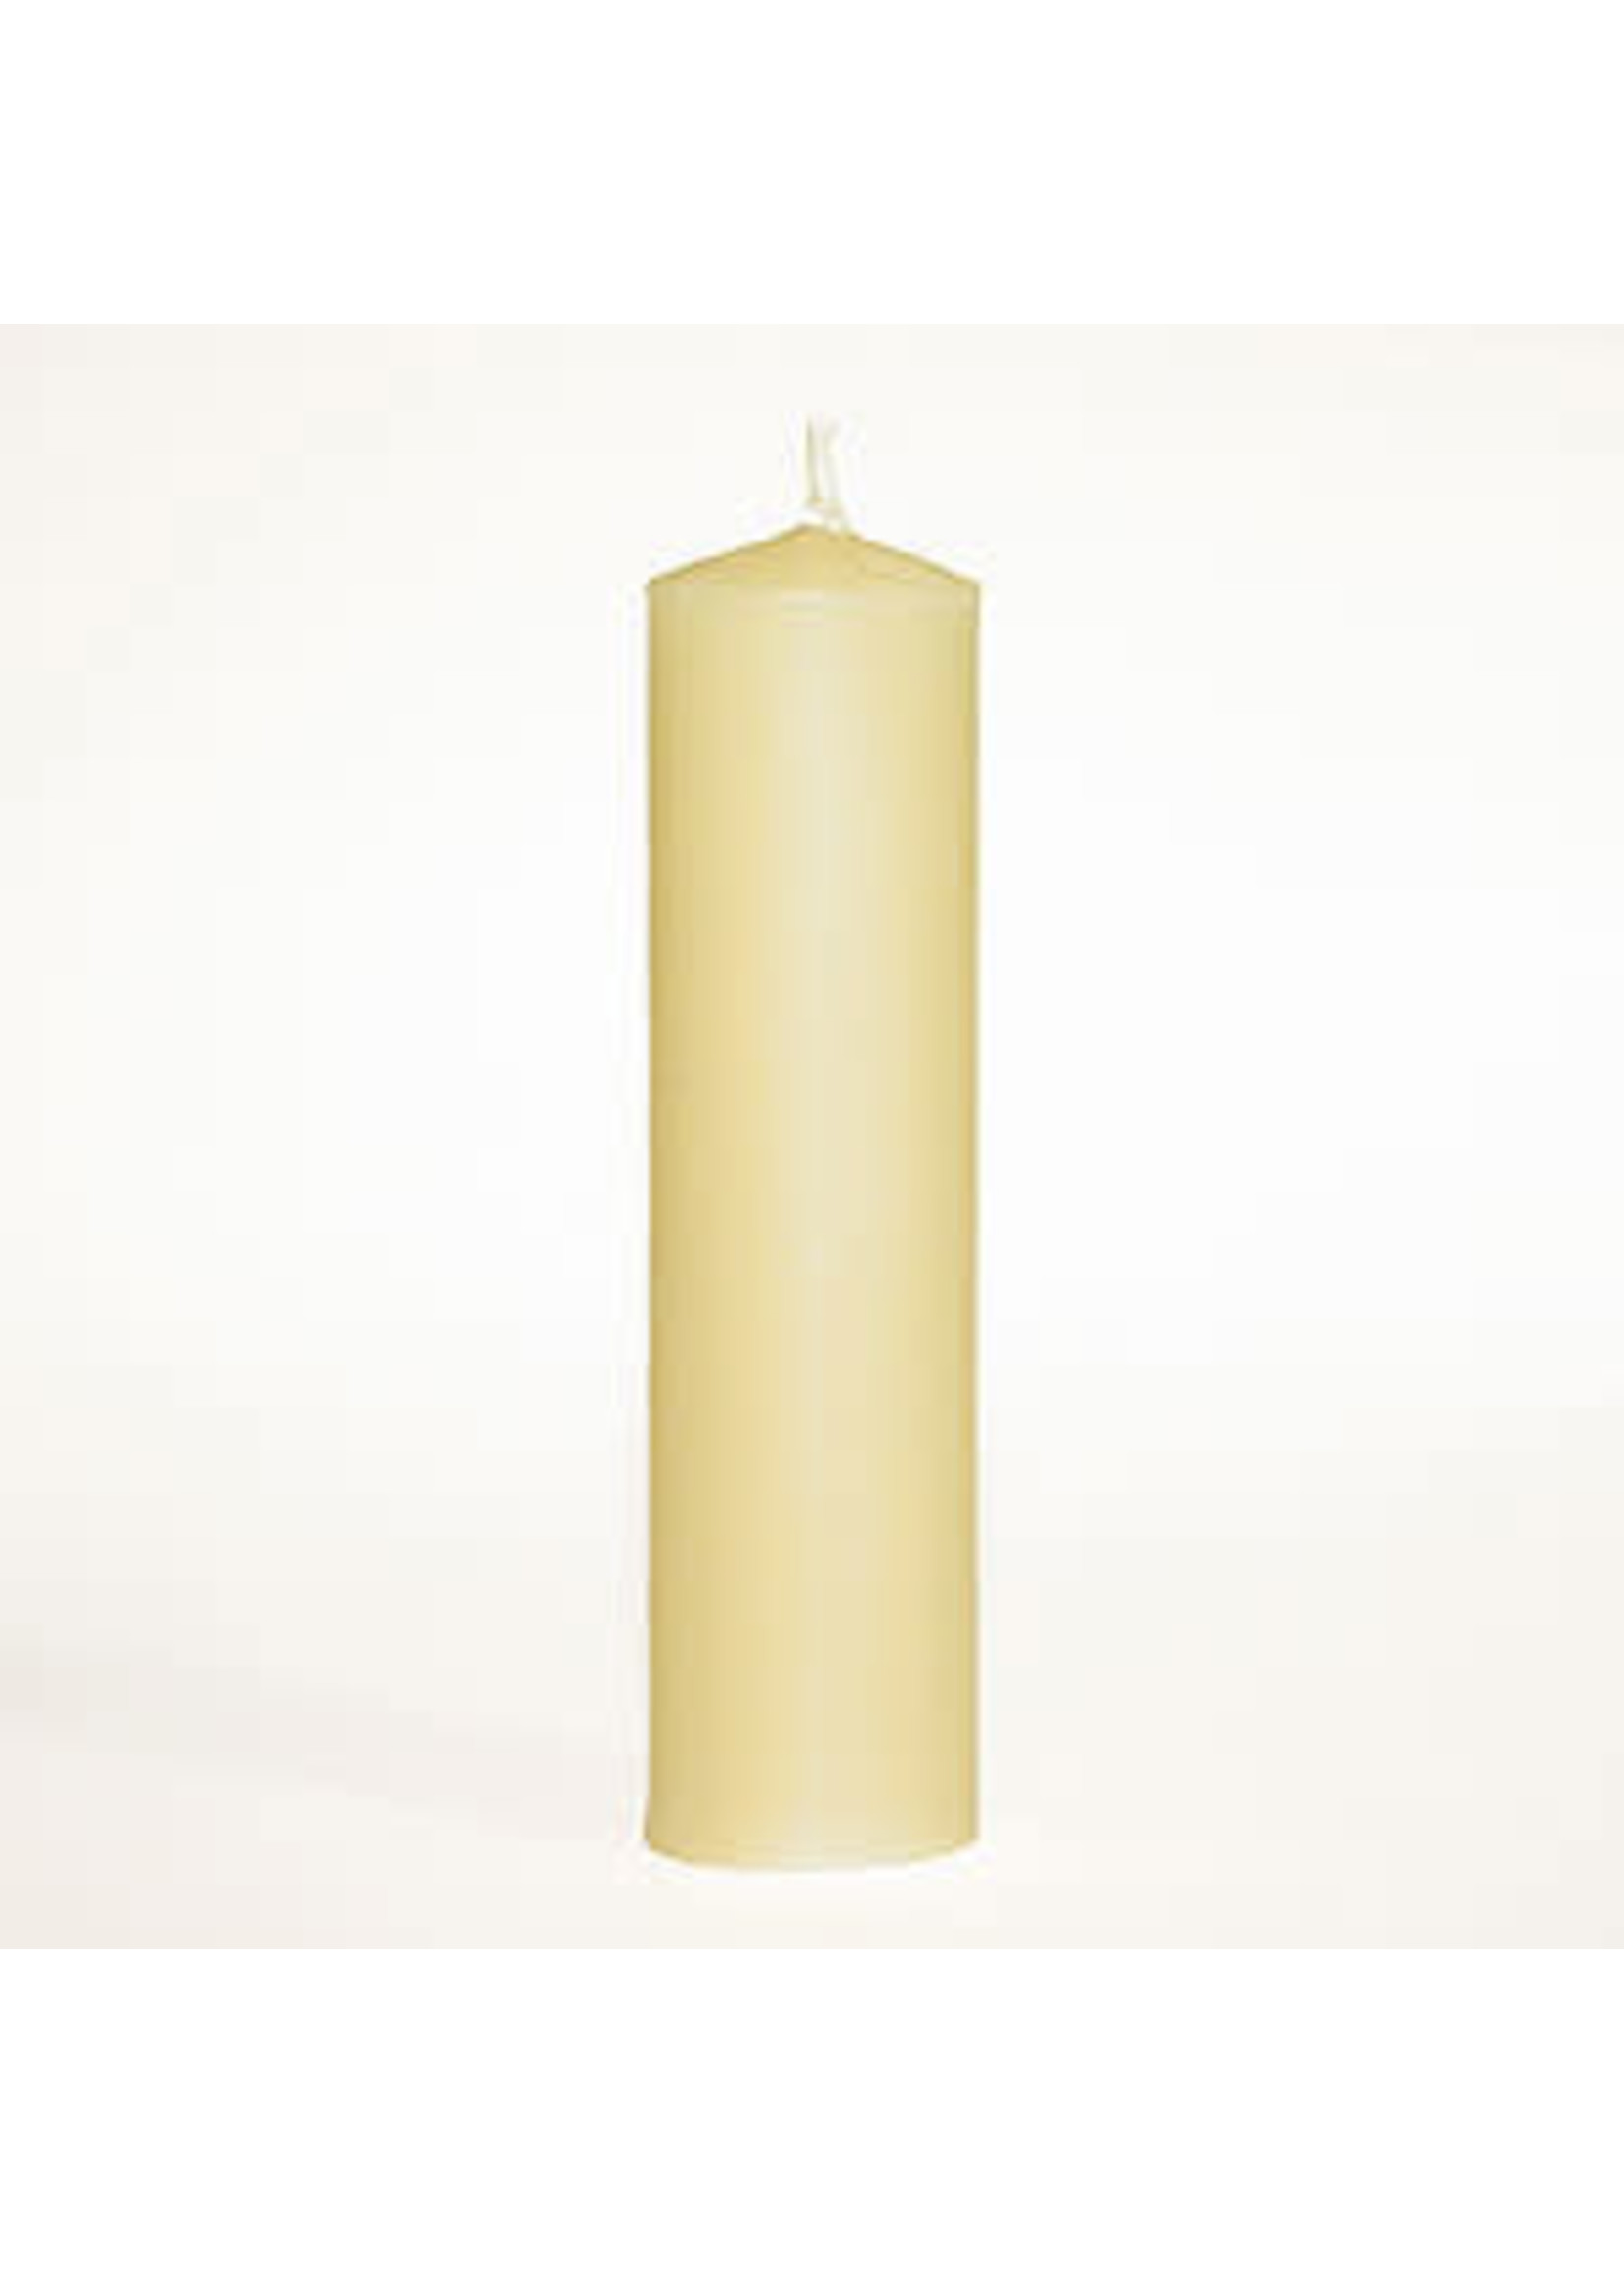 100% Beeswax 1-1/2" x 5-5/8" Plain End Candle Stick